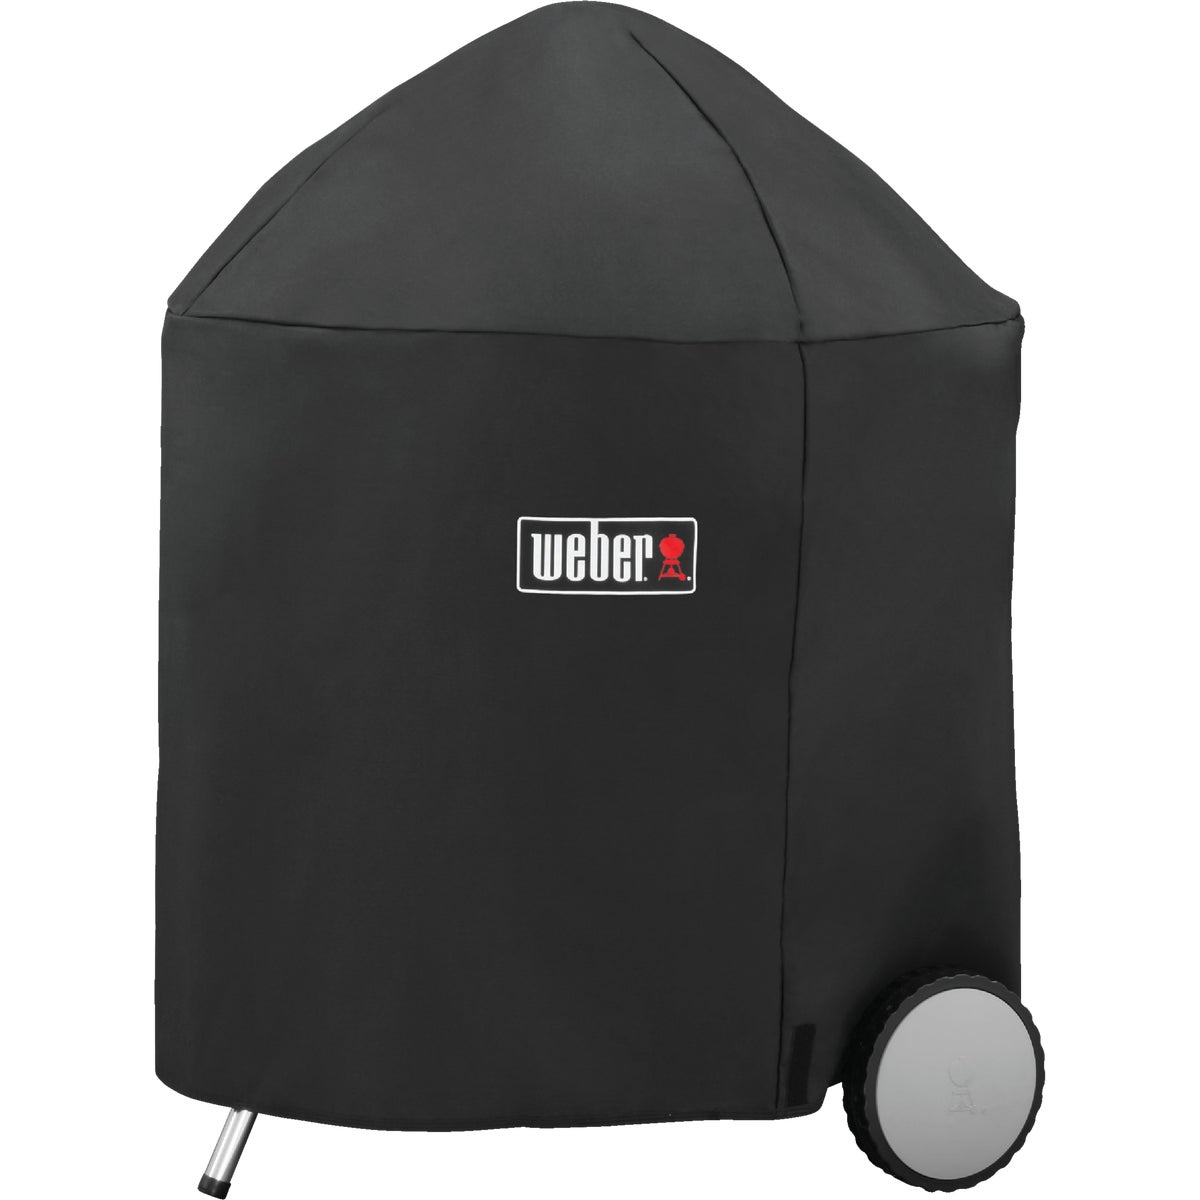 Item 801120, Heavy-duty cover is UV and extreme cold resistant.